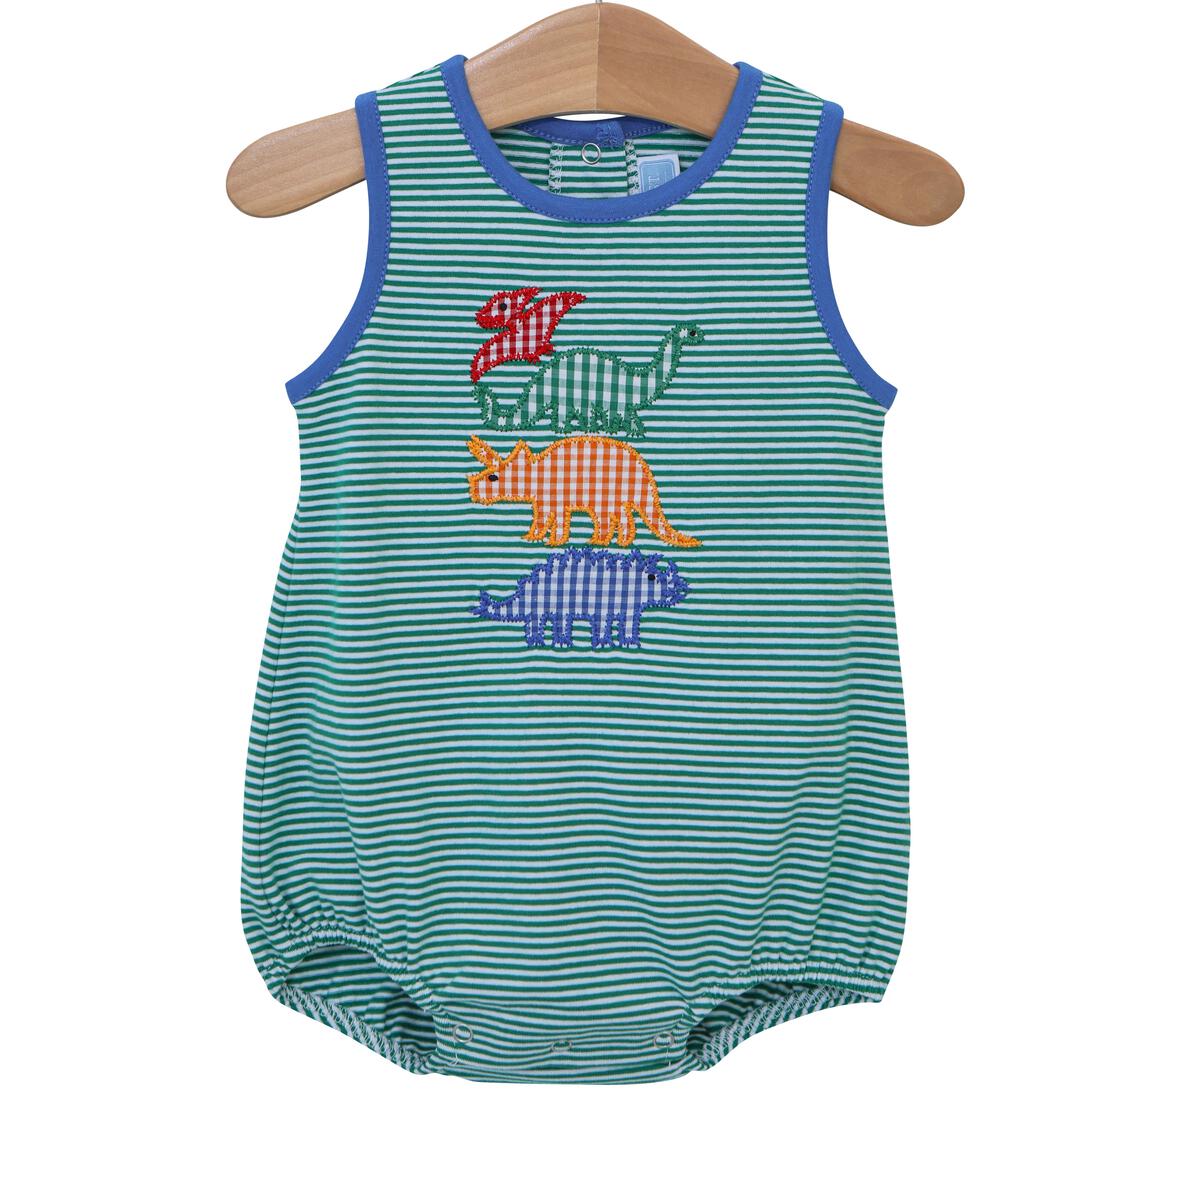 Green and white stripe boy bubble trimmed in royal blue with an applique of 4 small dinosaurs